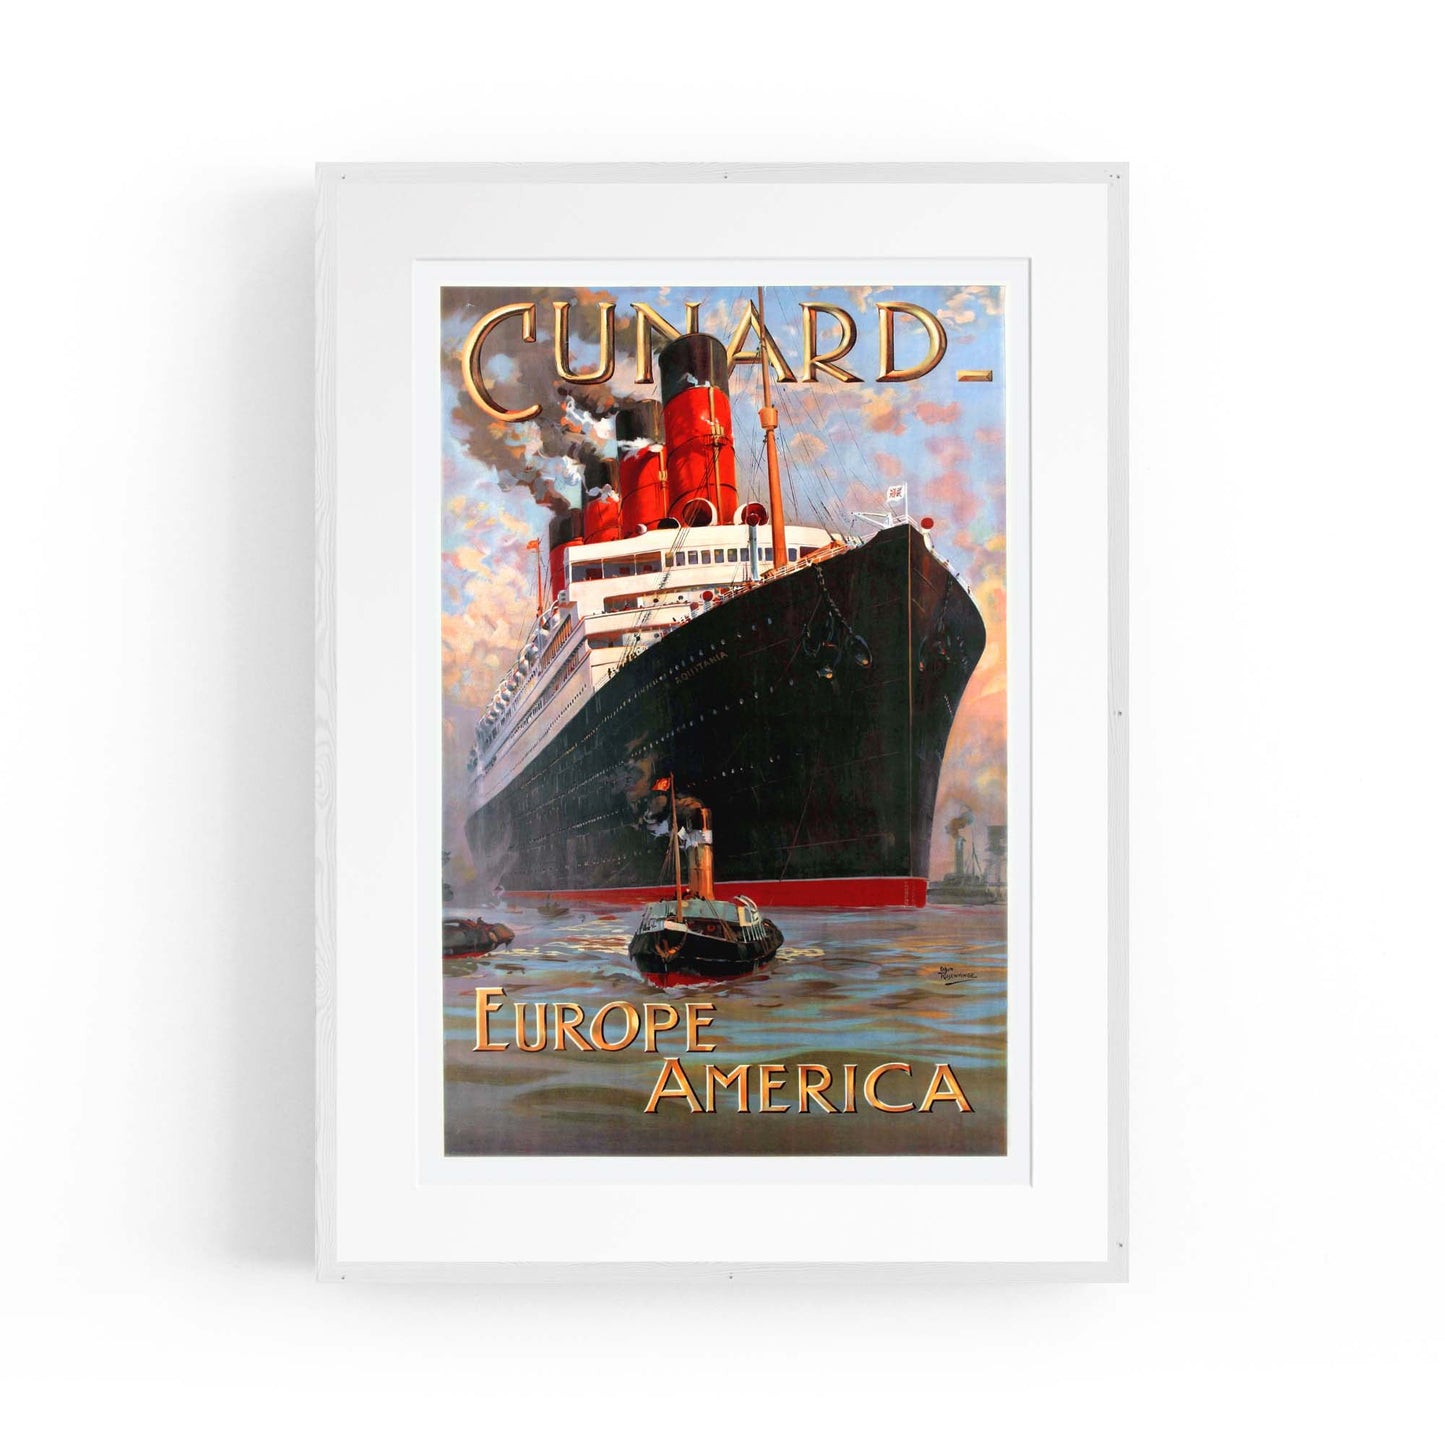 Cunard Line Europe to America Vintage Wall Art - The Affordable Art Company